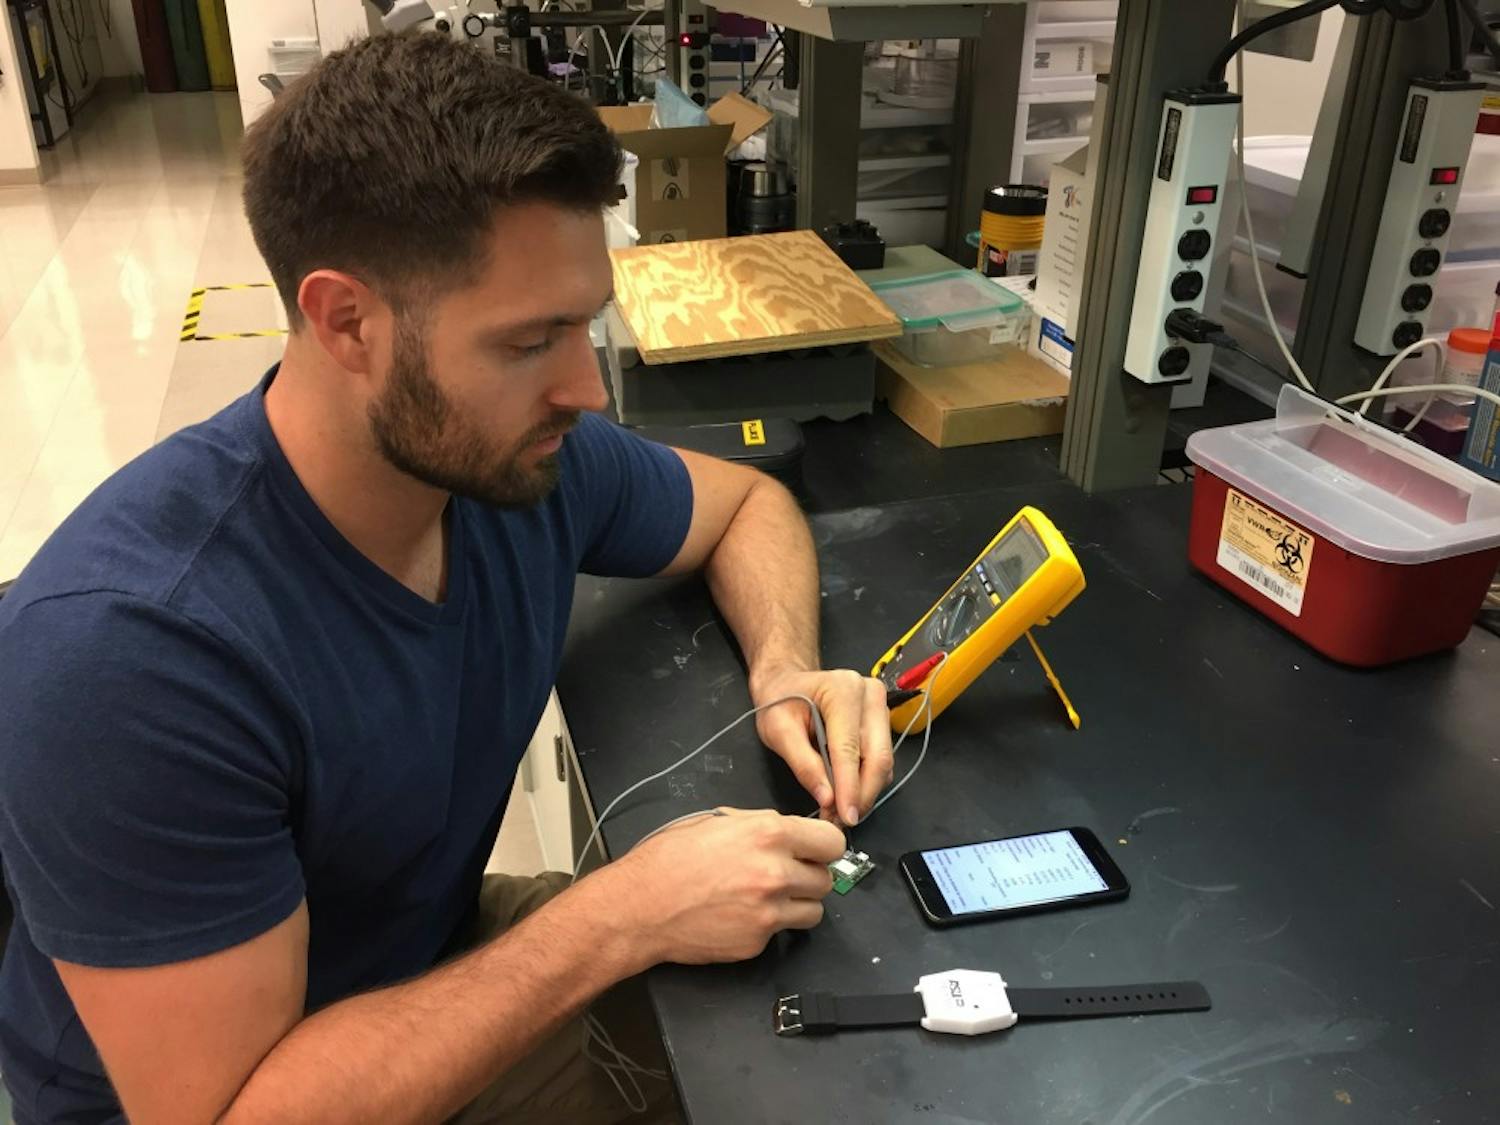 Kyle Mallires working on a PRISMS watch in Tempe, Arizona on April 17, 2017.